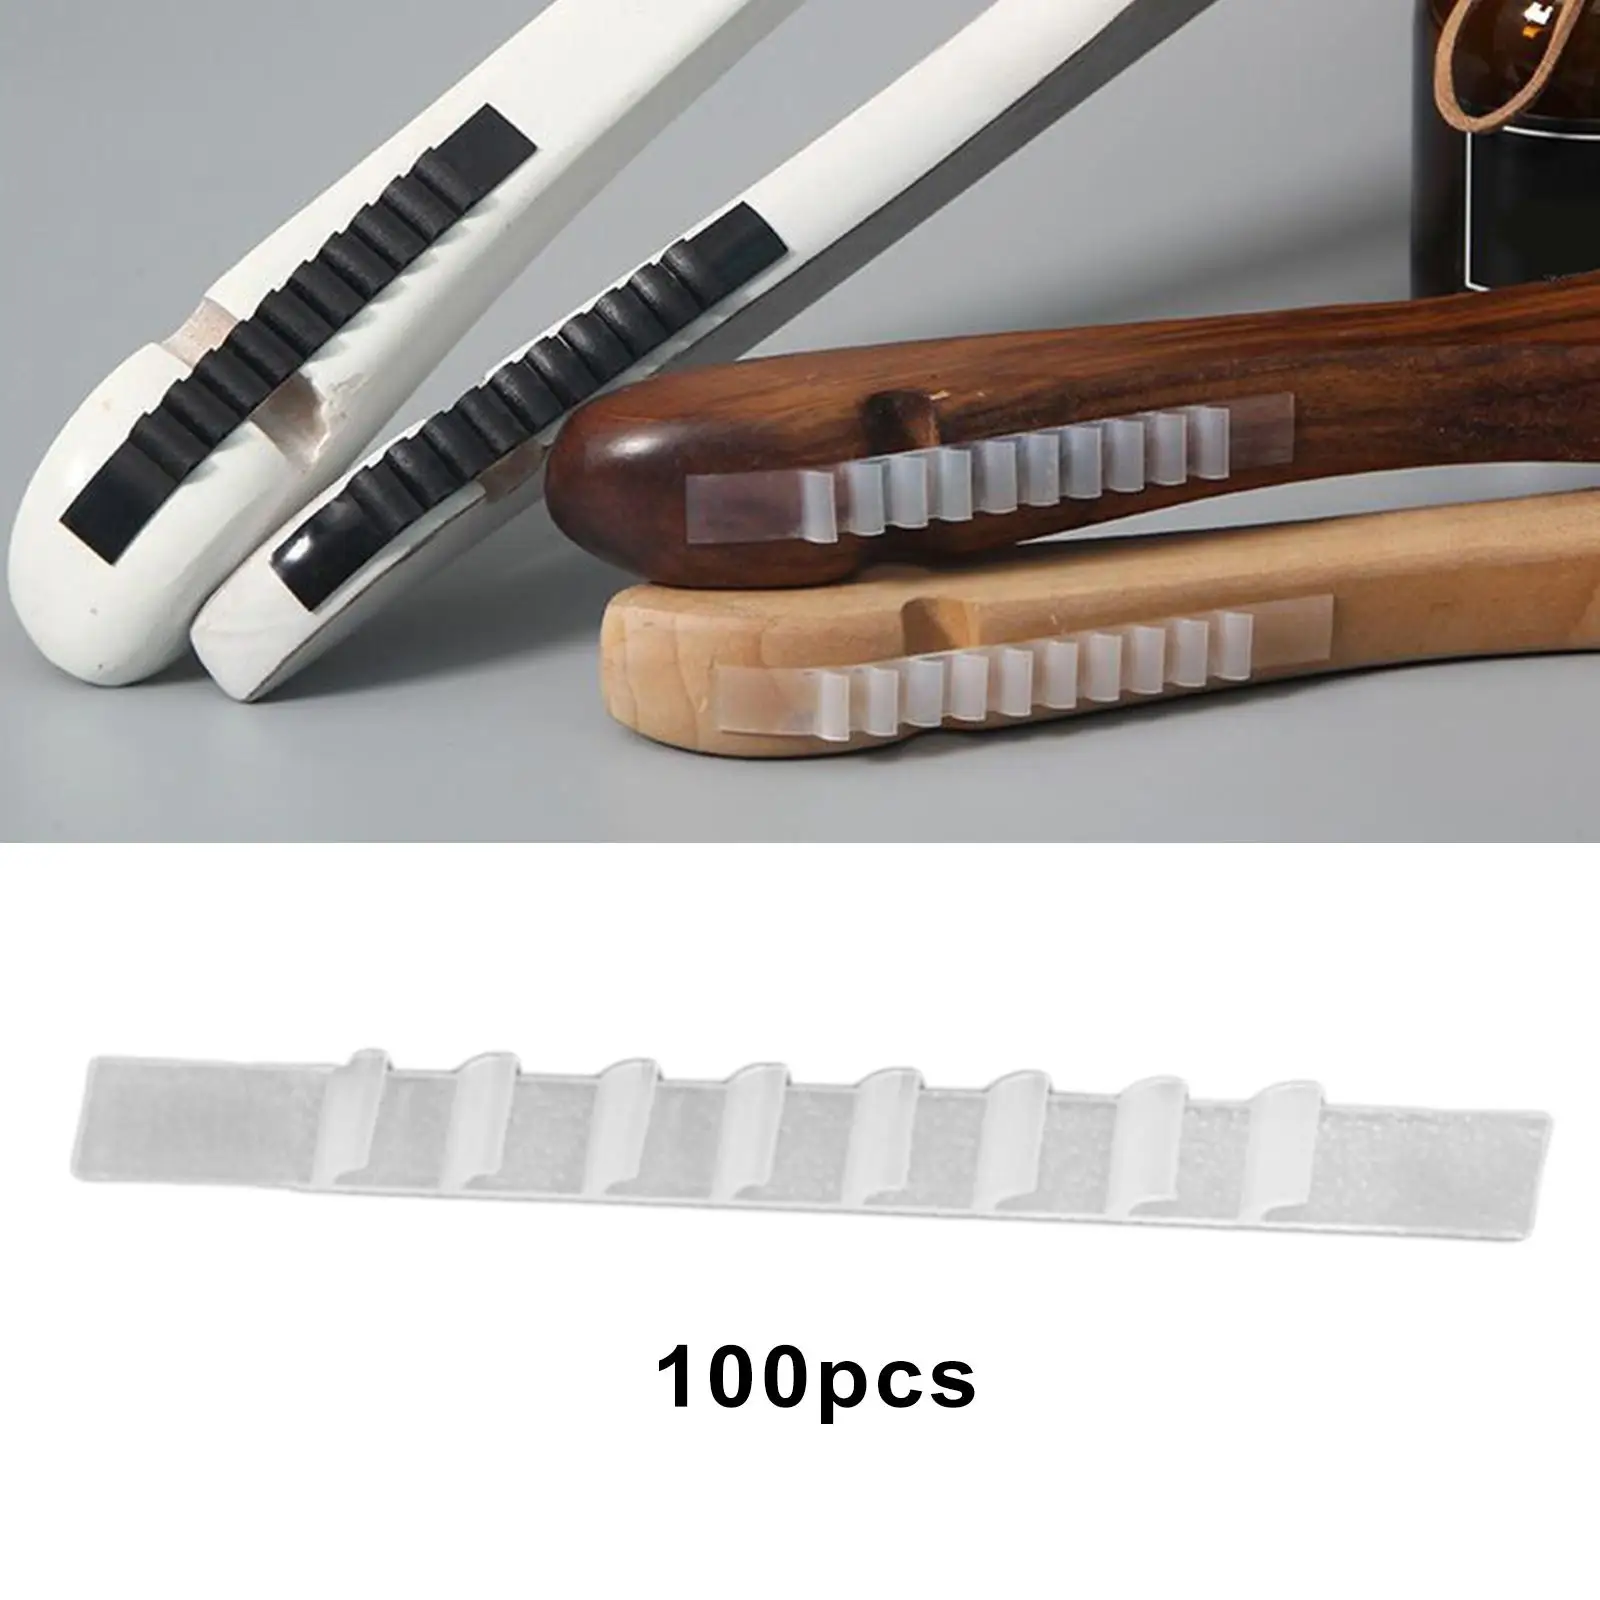 100x Silicone Hanger Strips with ,Shoulder Strap Grip,Non Slip Hanger Grips,Adhesive Clothes Hanger Grips